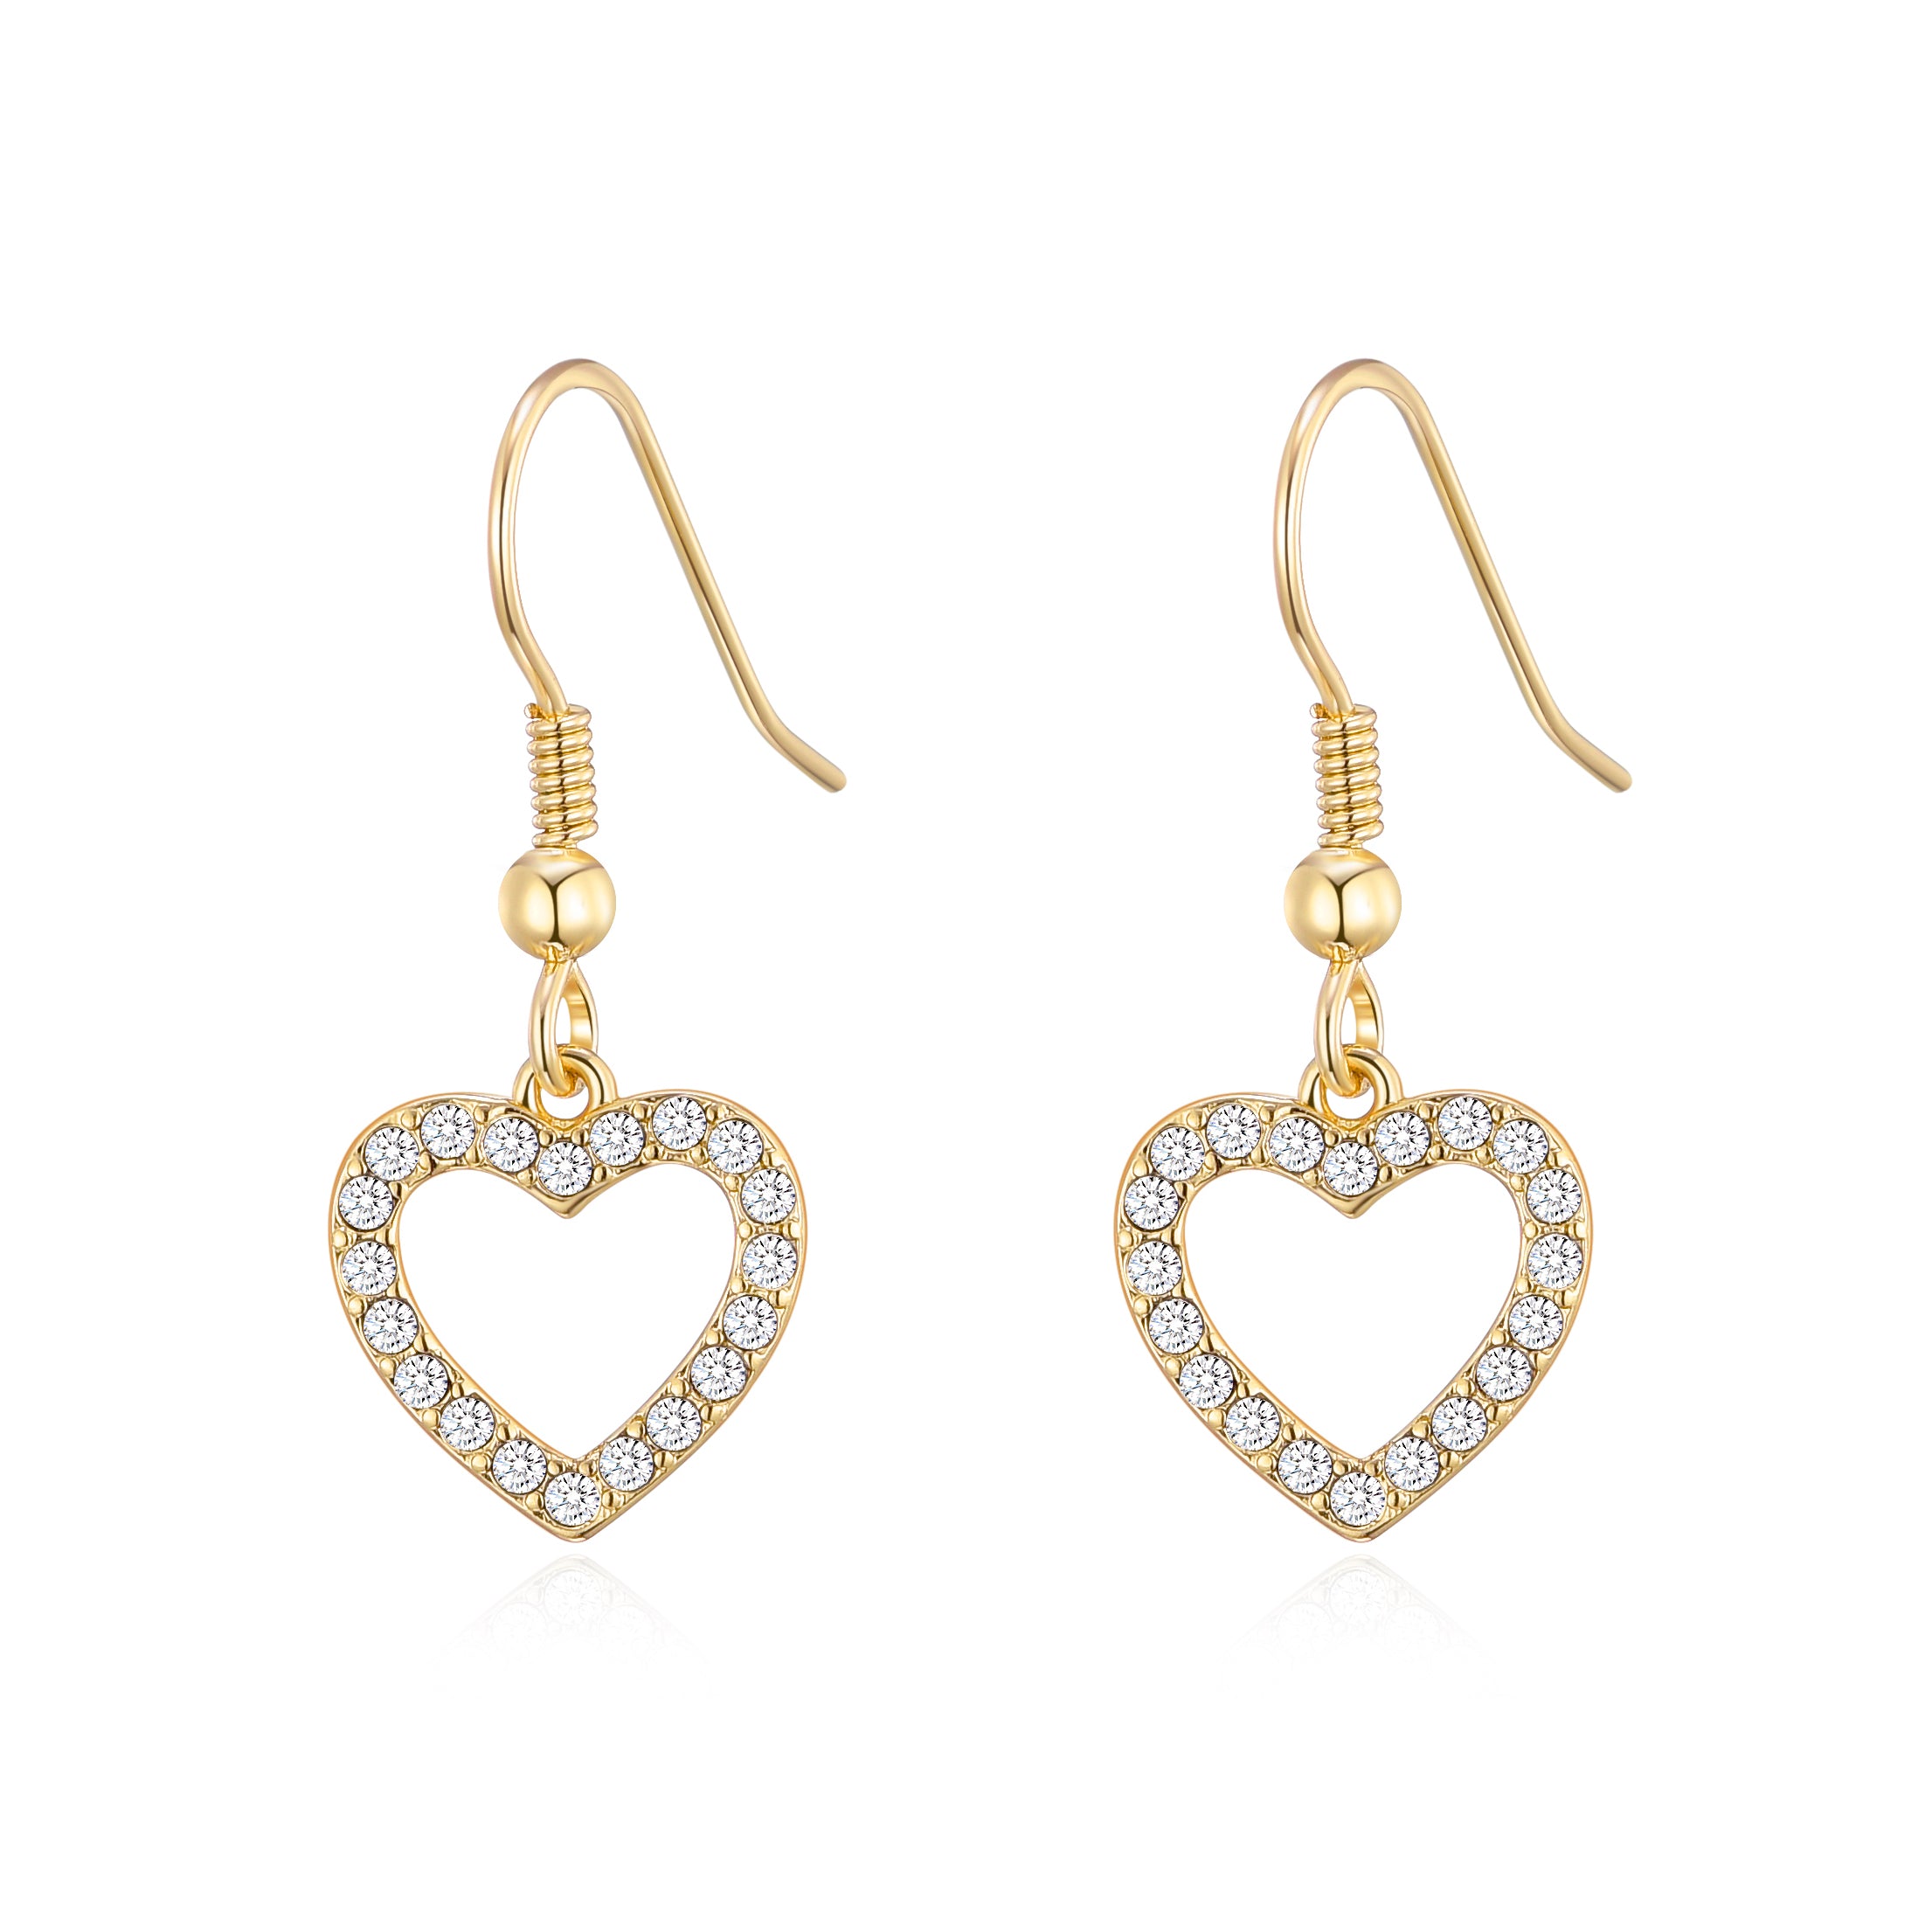 Gold Plated Open Heart Drop Earrings Created with Zircondia® Crystals by Philip Jones Jewellery